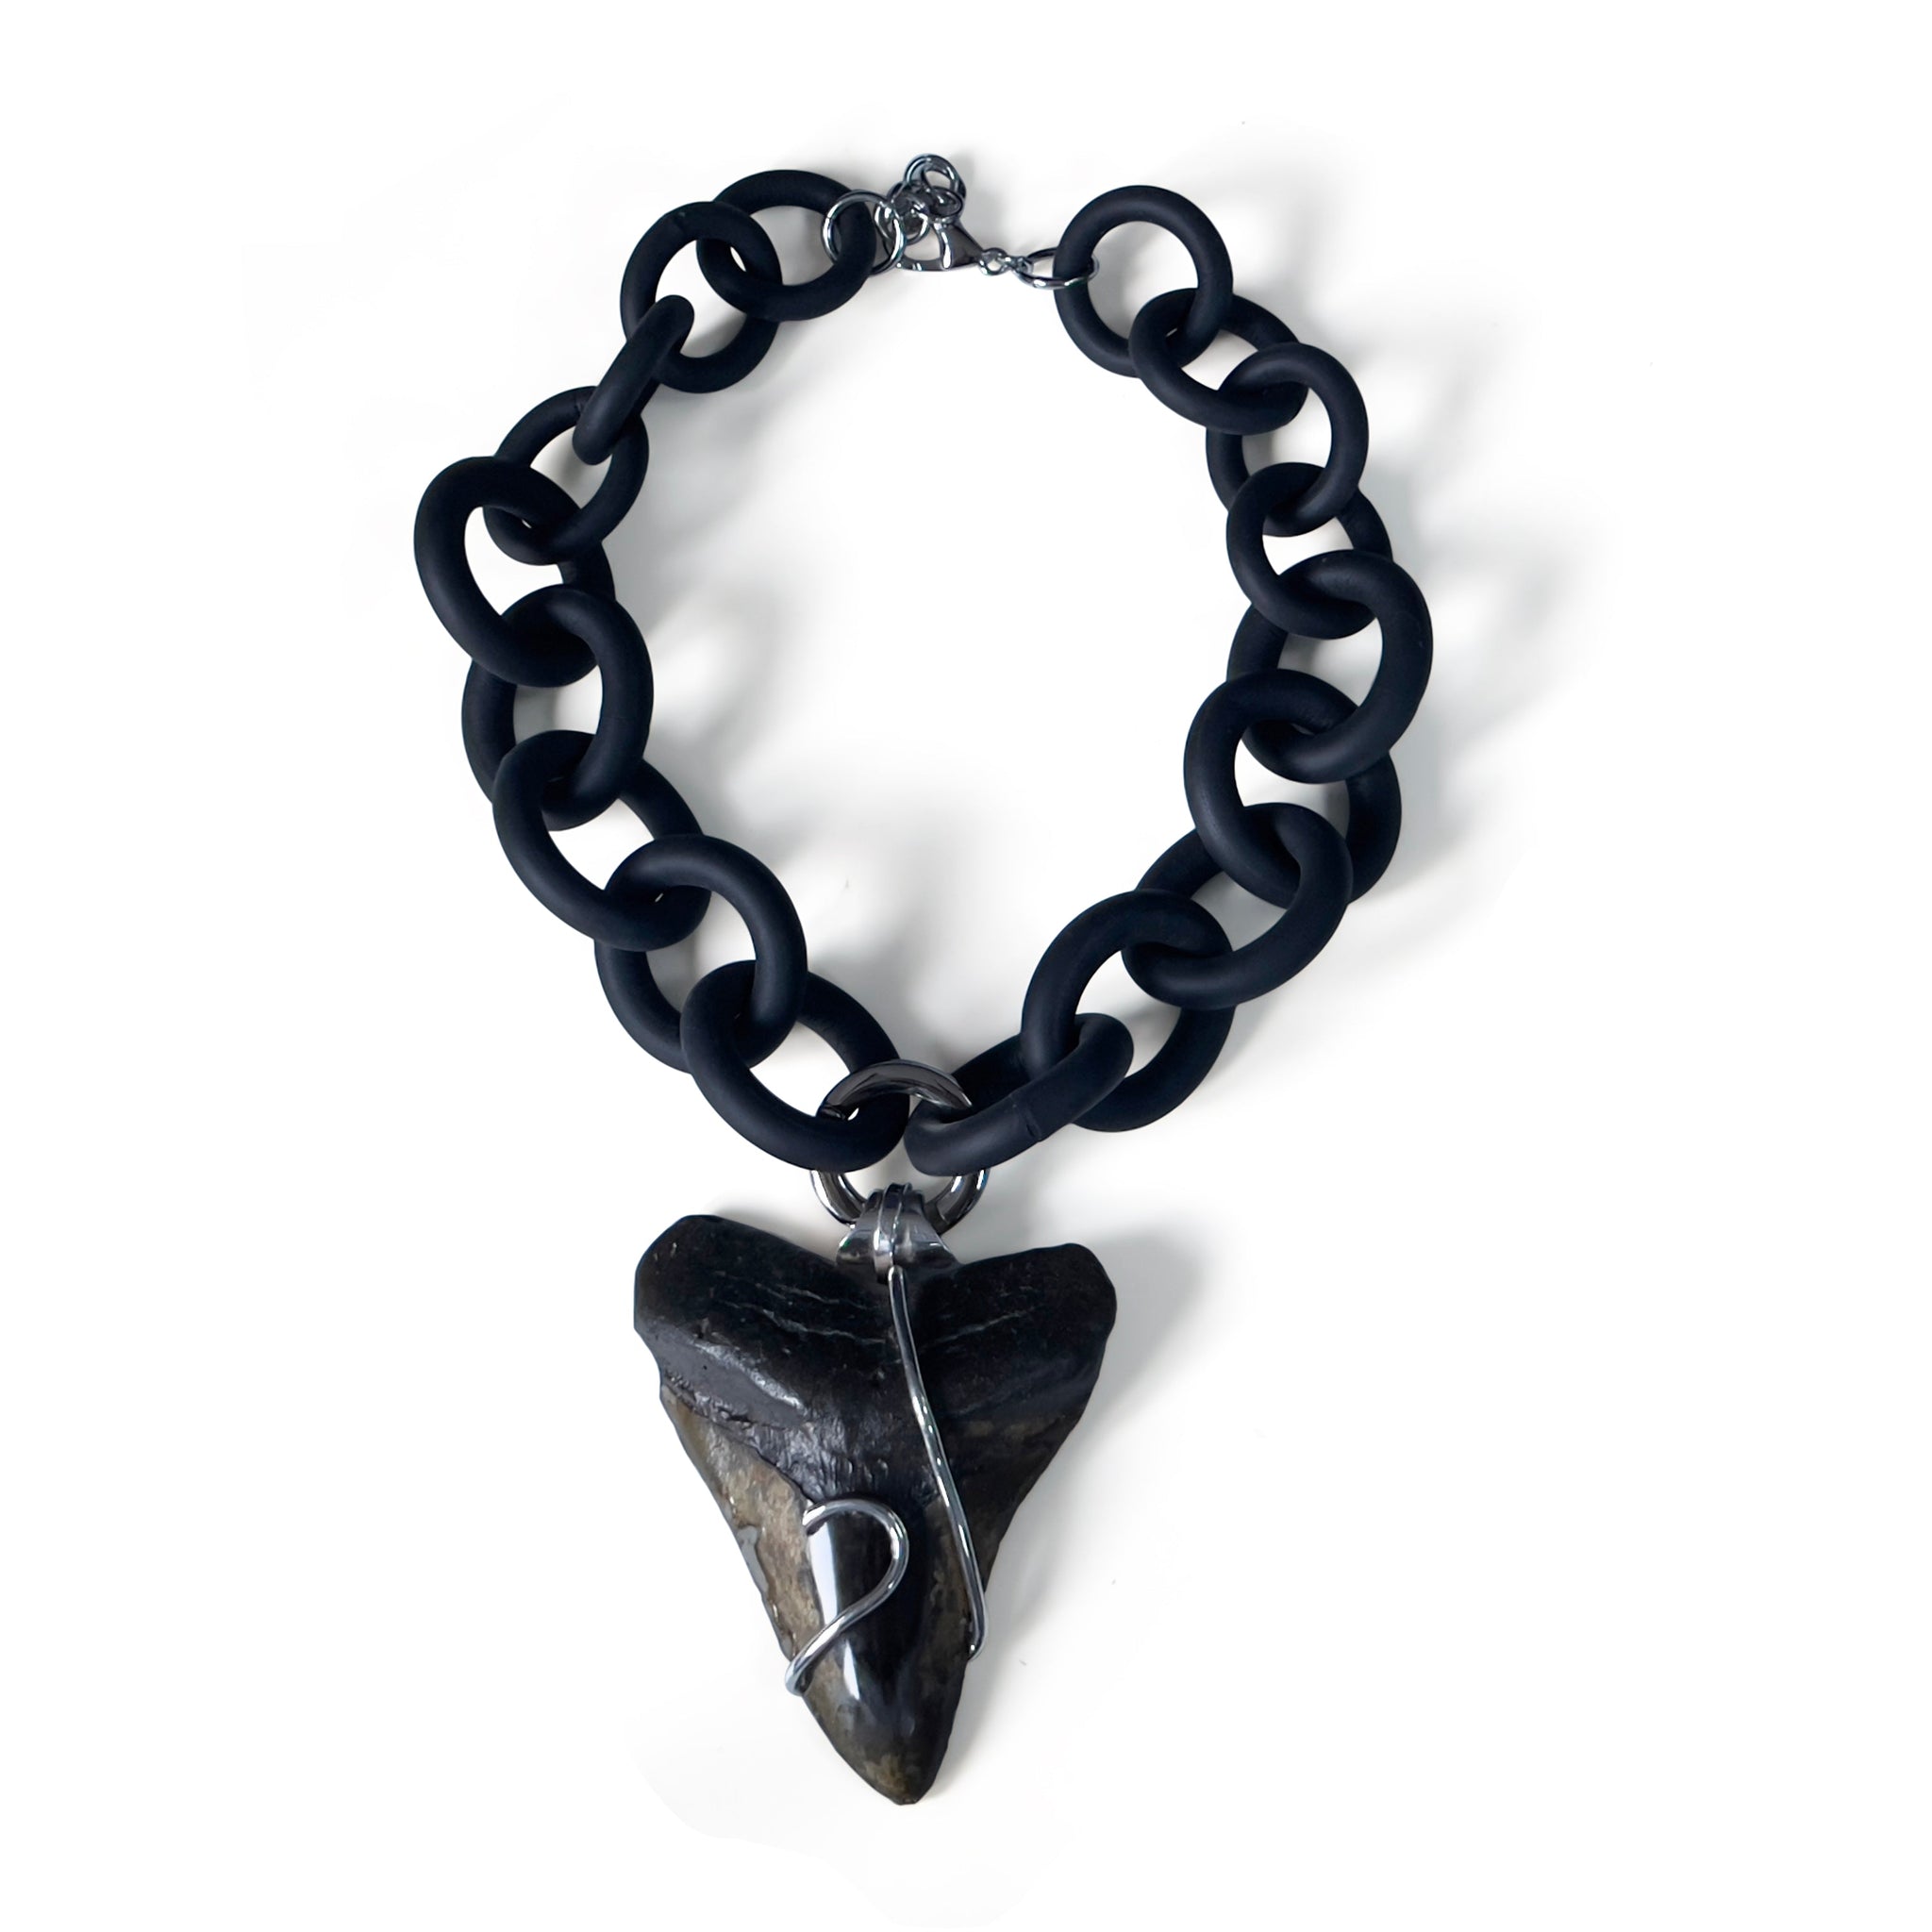 Megalodon Tooth 5-in-1 Rubber Necklace 4 by NYET Jewelry